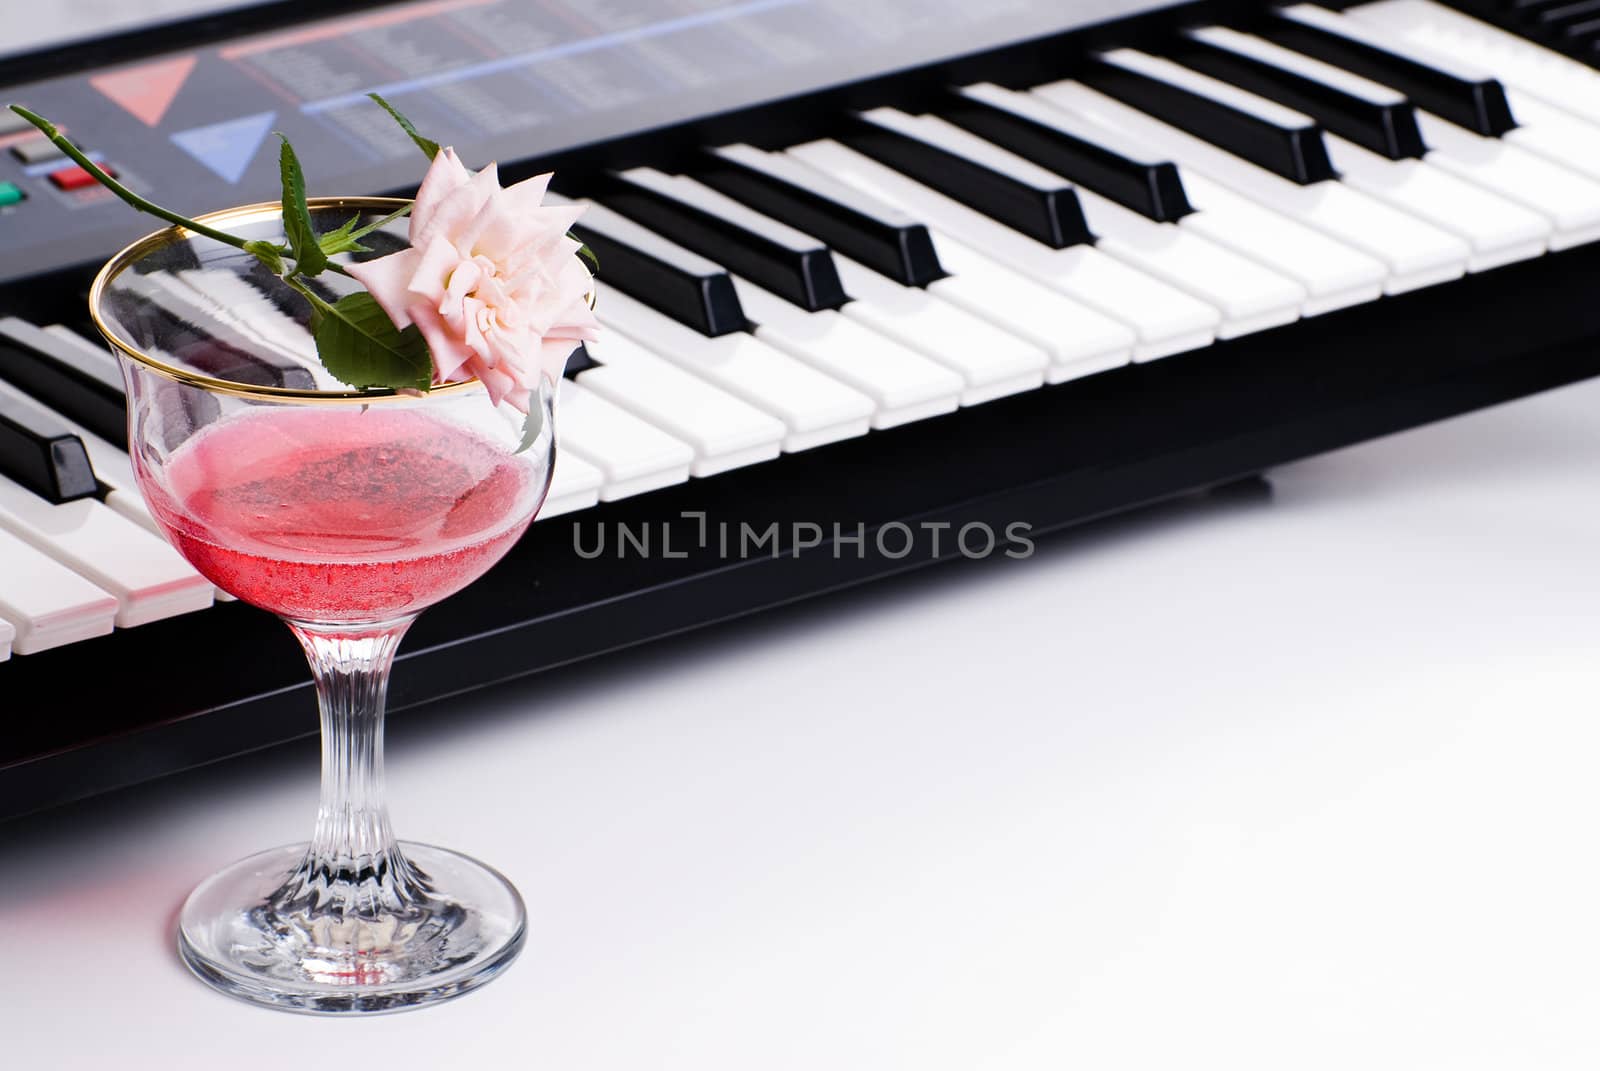 An electronic keyboard along with a fresh rose and a glass of pink wine, shot on white